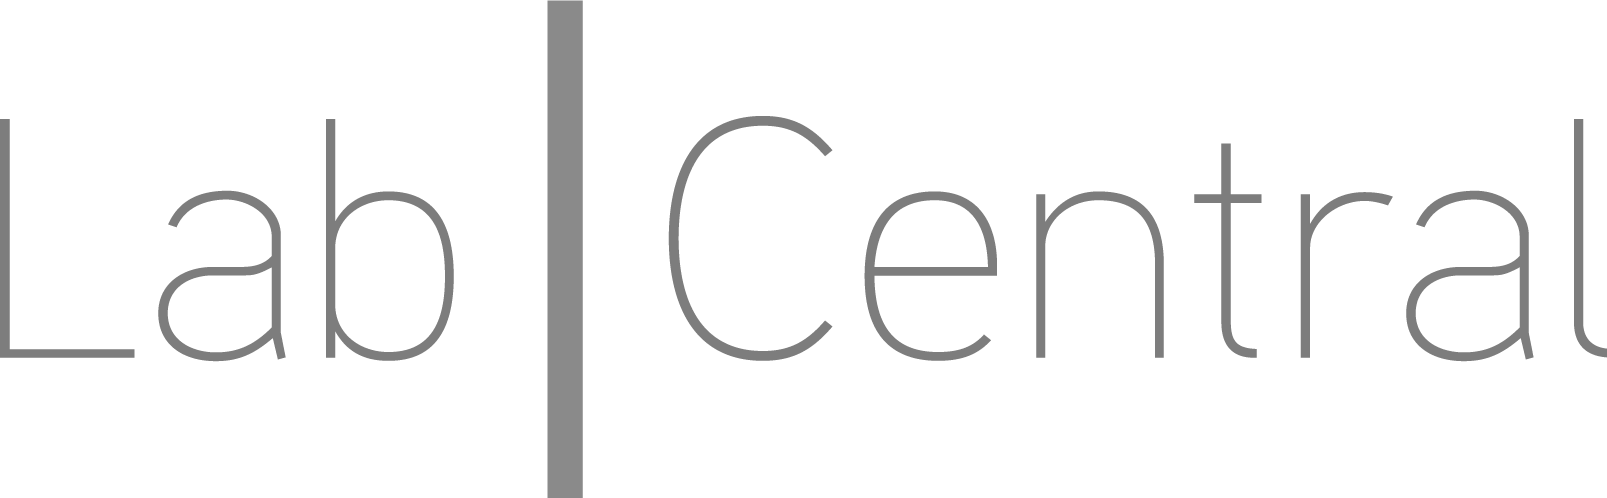 LabCentral_Logo_grayscale.png